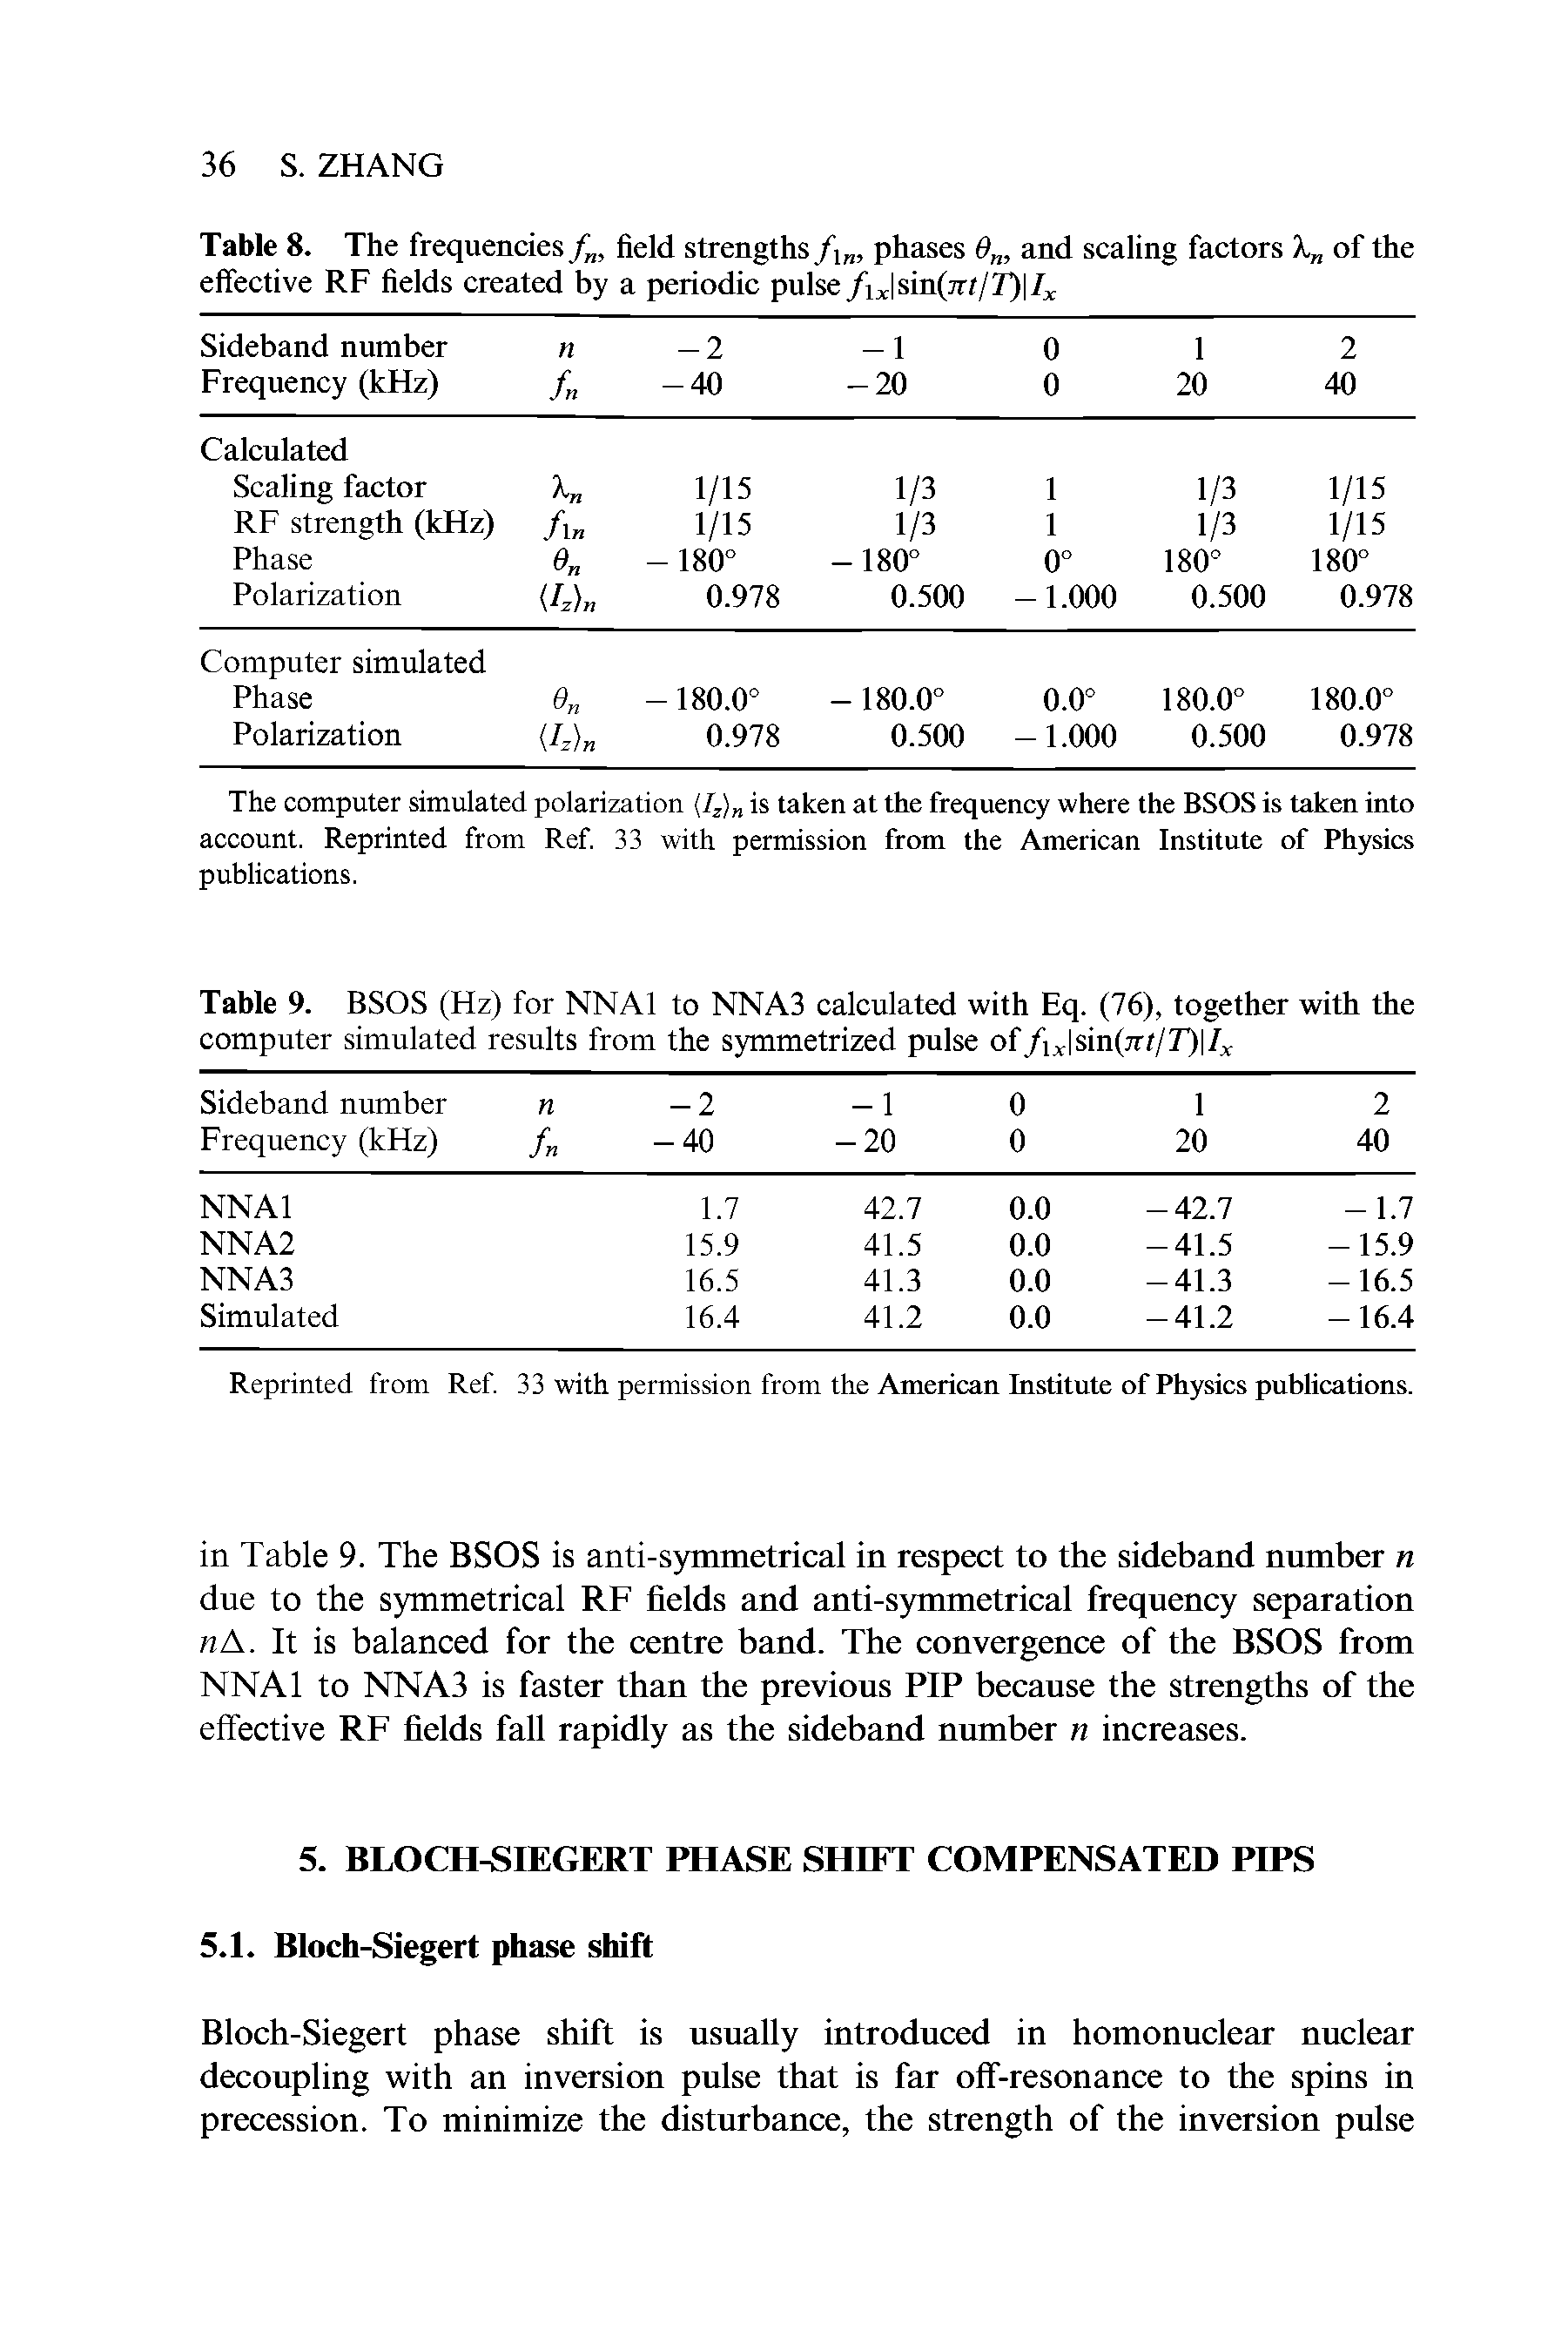 Table 8. The frequencies, field strengths /ln, phases d , and scaling factors X of the effective RF fields created by a periodic pulse /iJsin(jr//7) Ix...